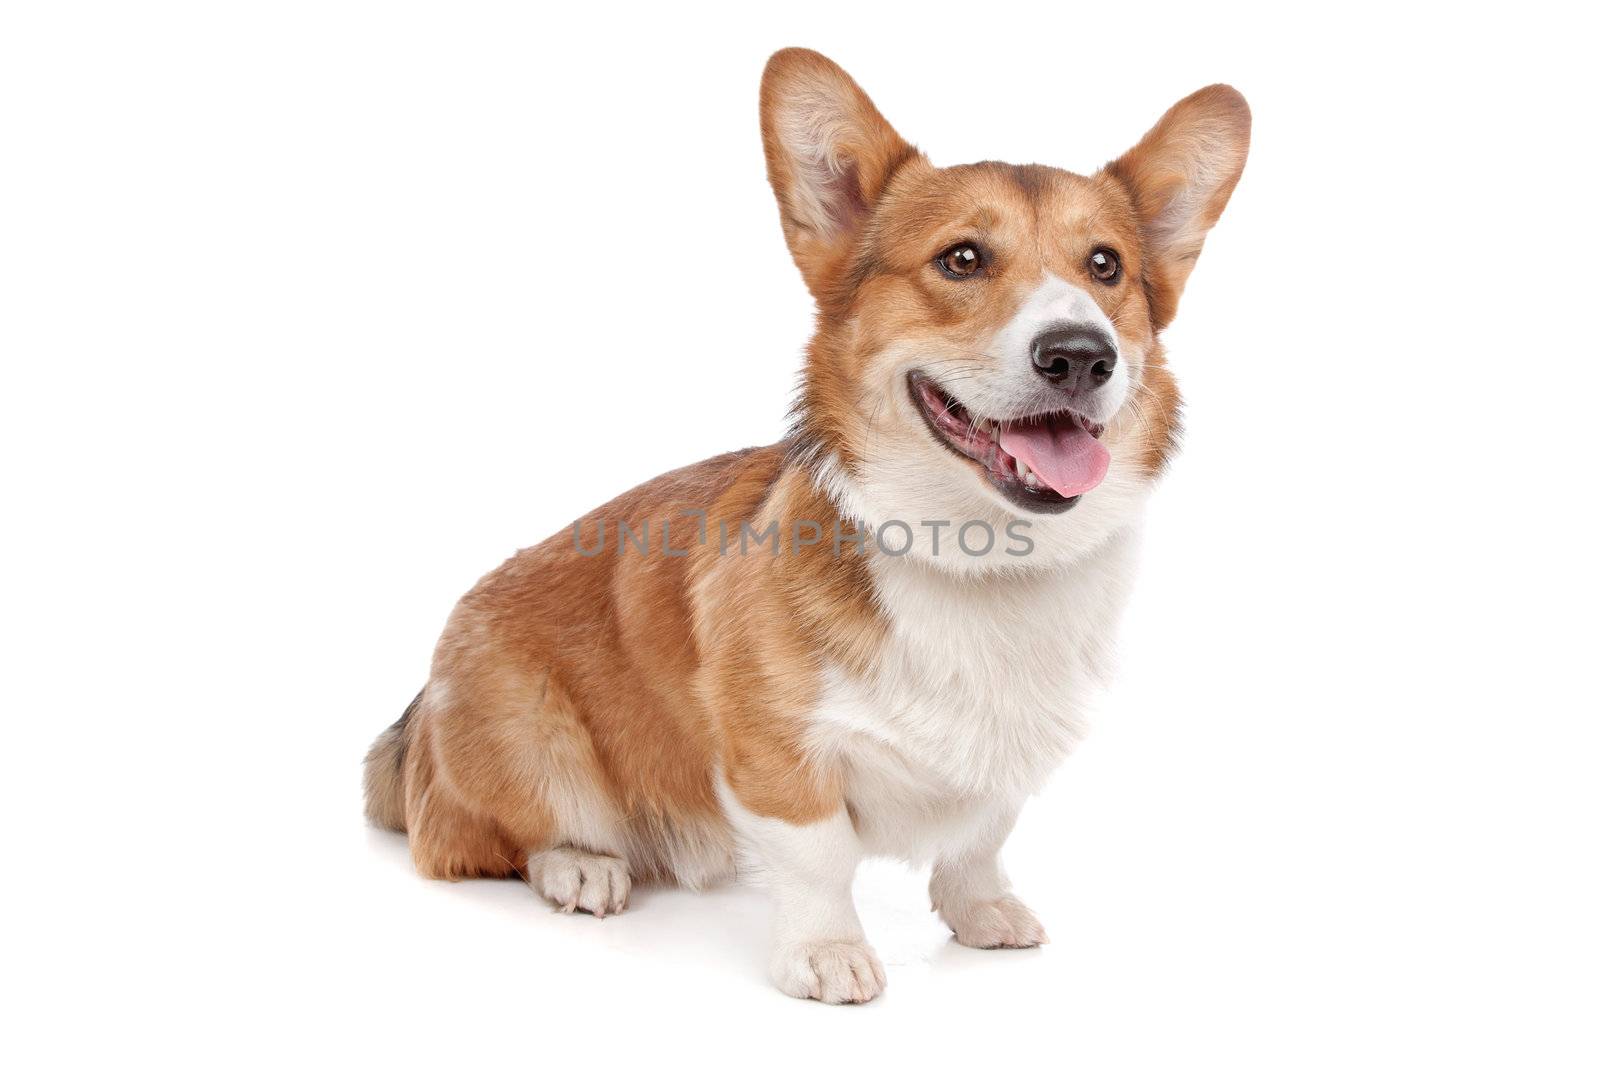 Pembroke Welsh Corgi in front of a white background